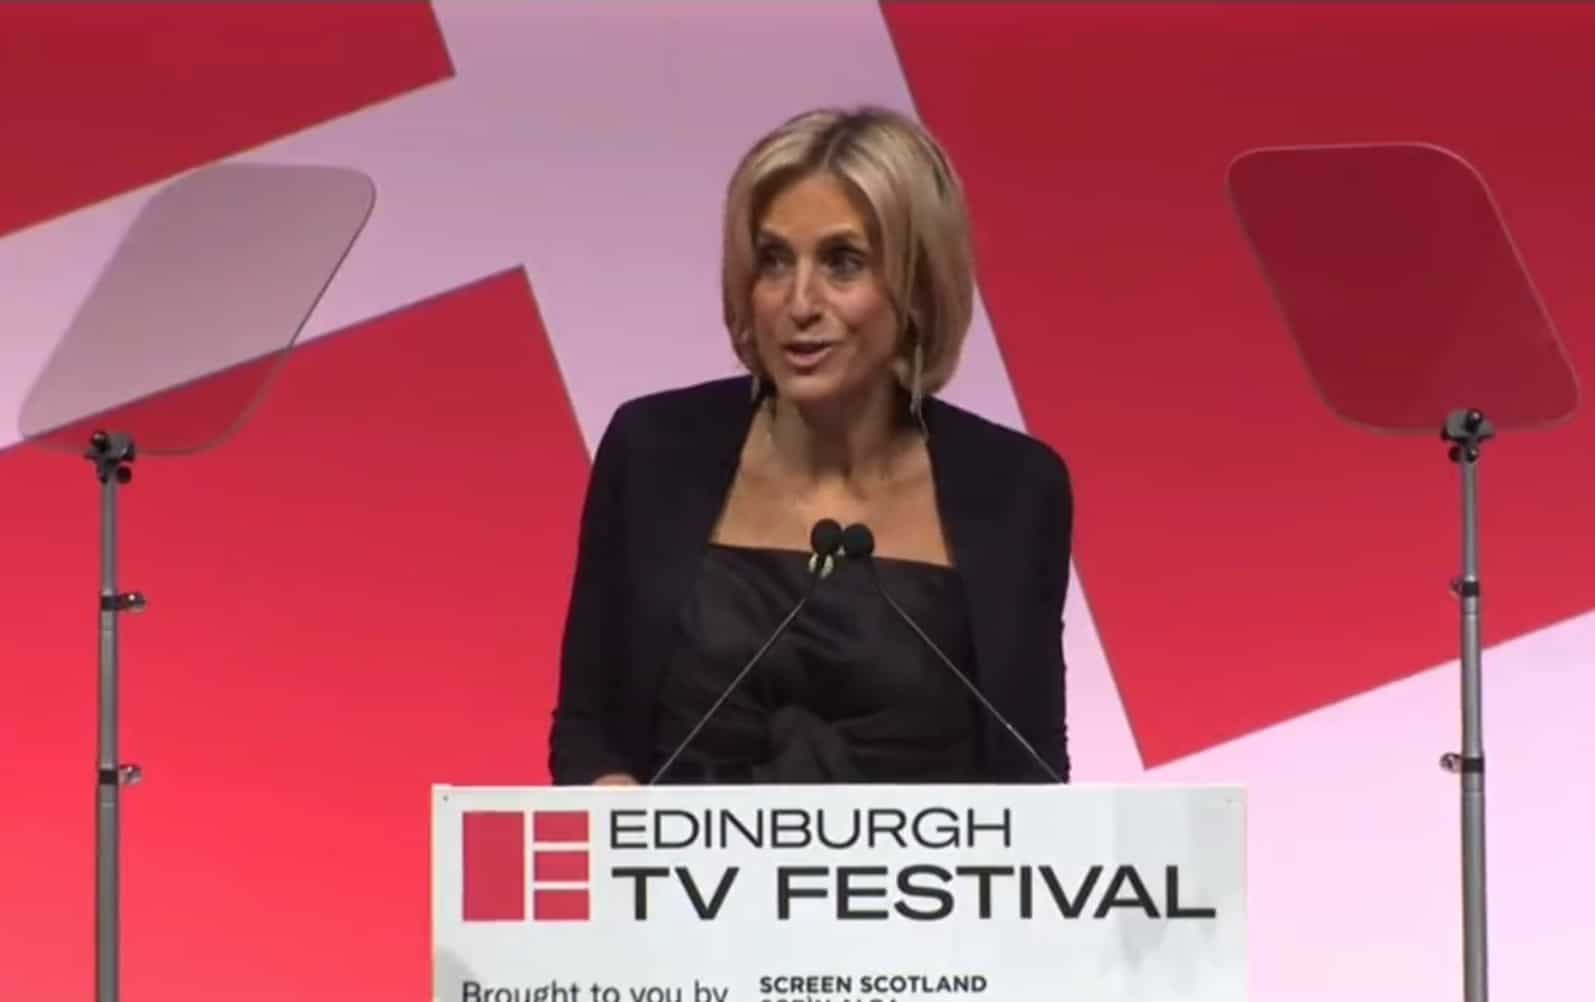 ‘Phenominal’ Maitlis says UK media in ‘automatic crouch position’ over Brexit